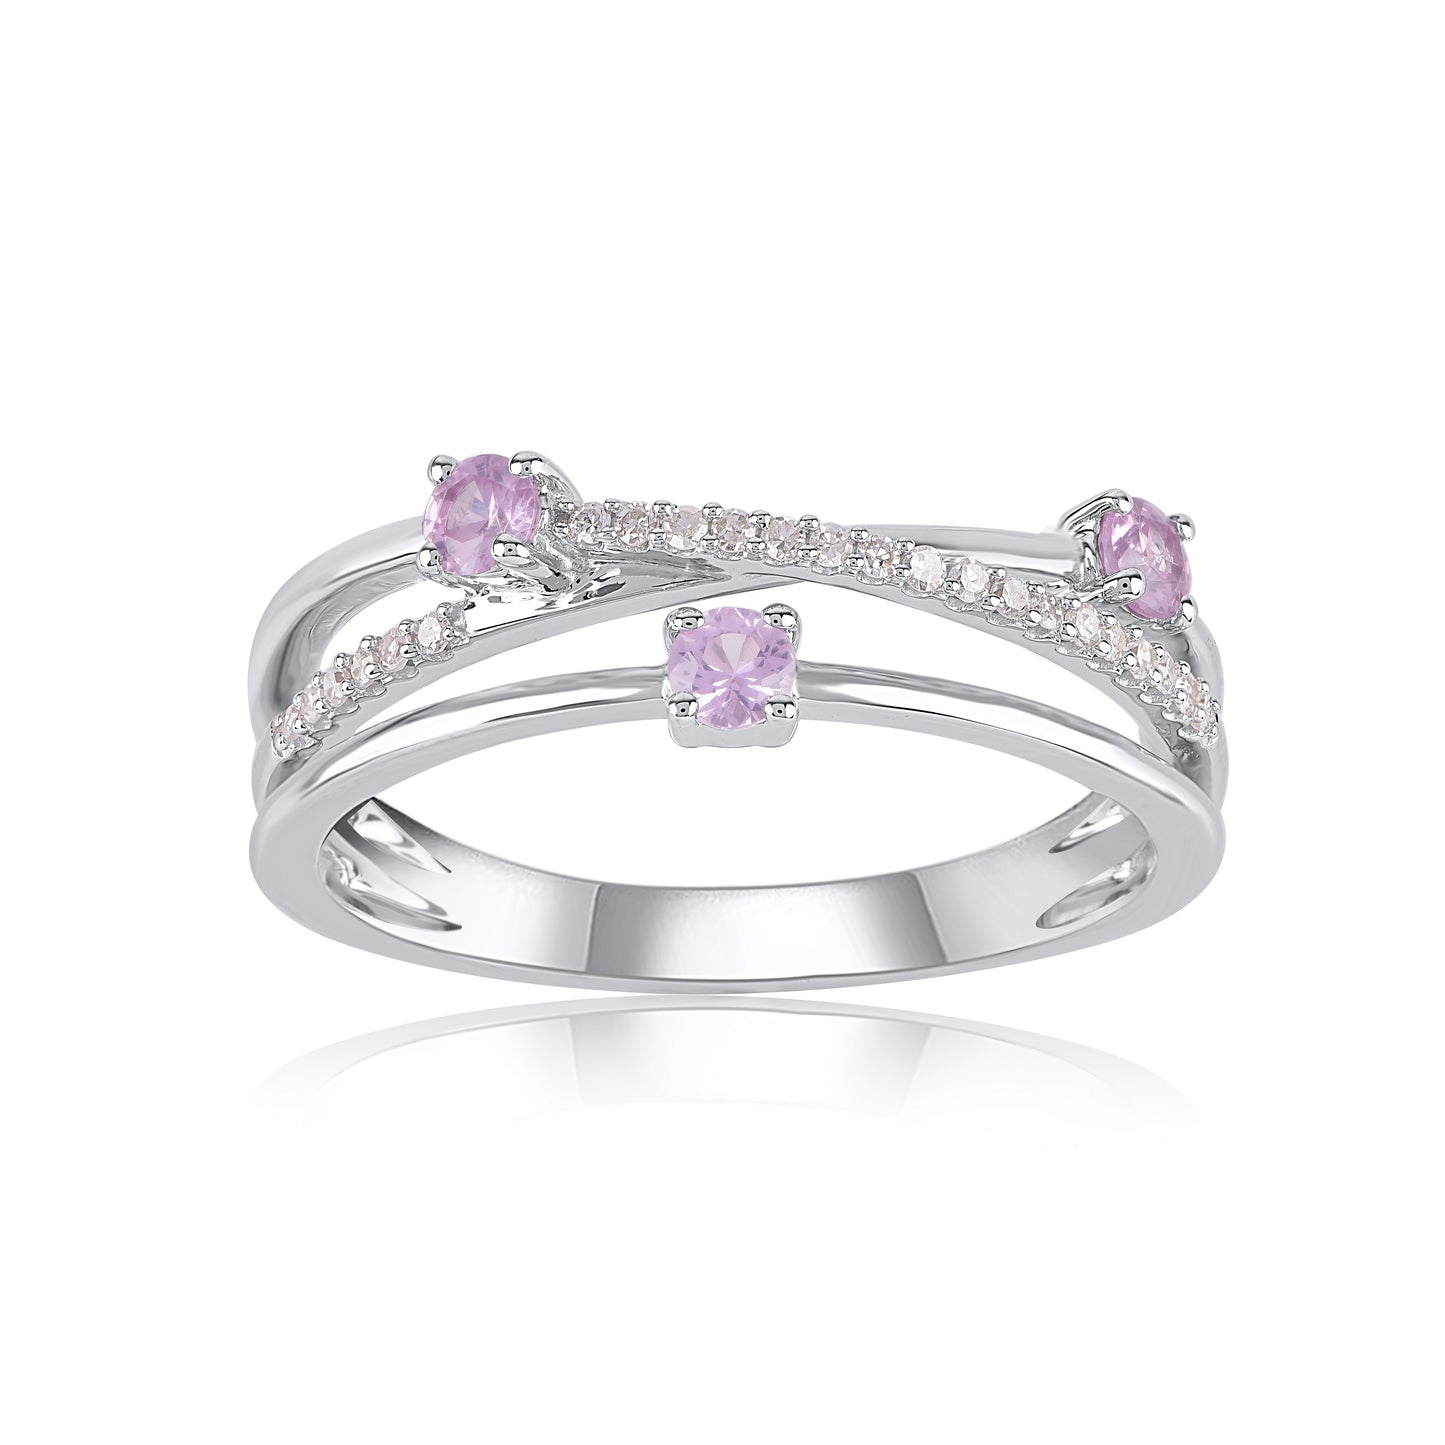 Pink sapphire band Ring